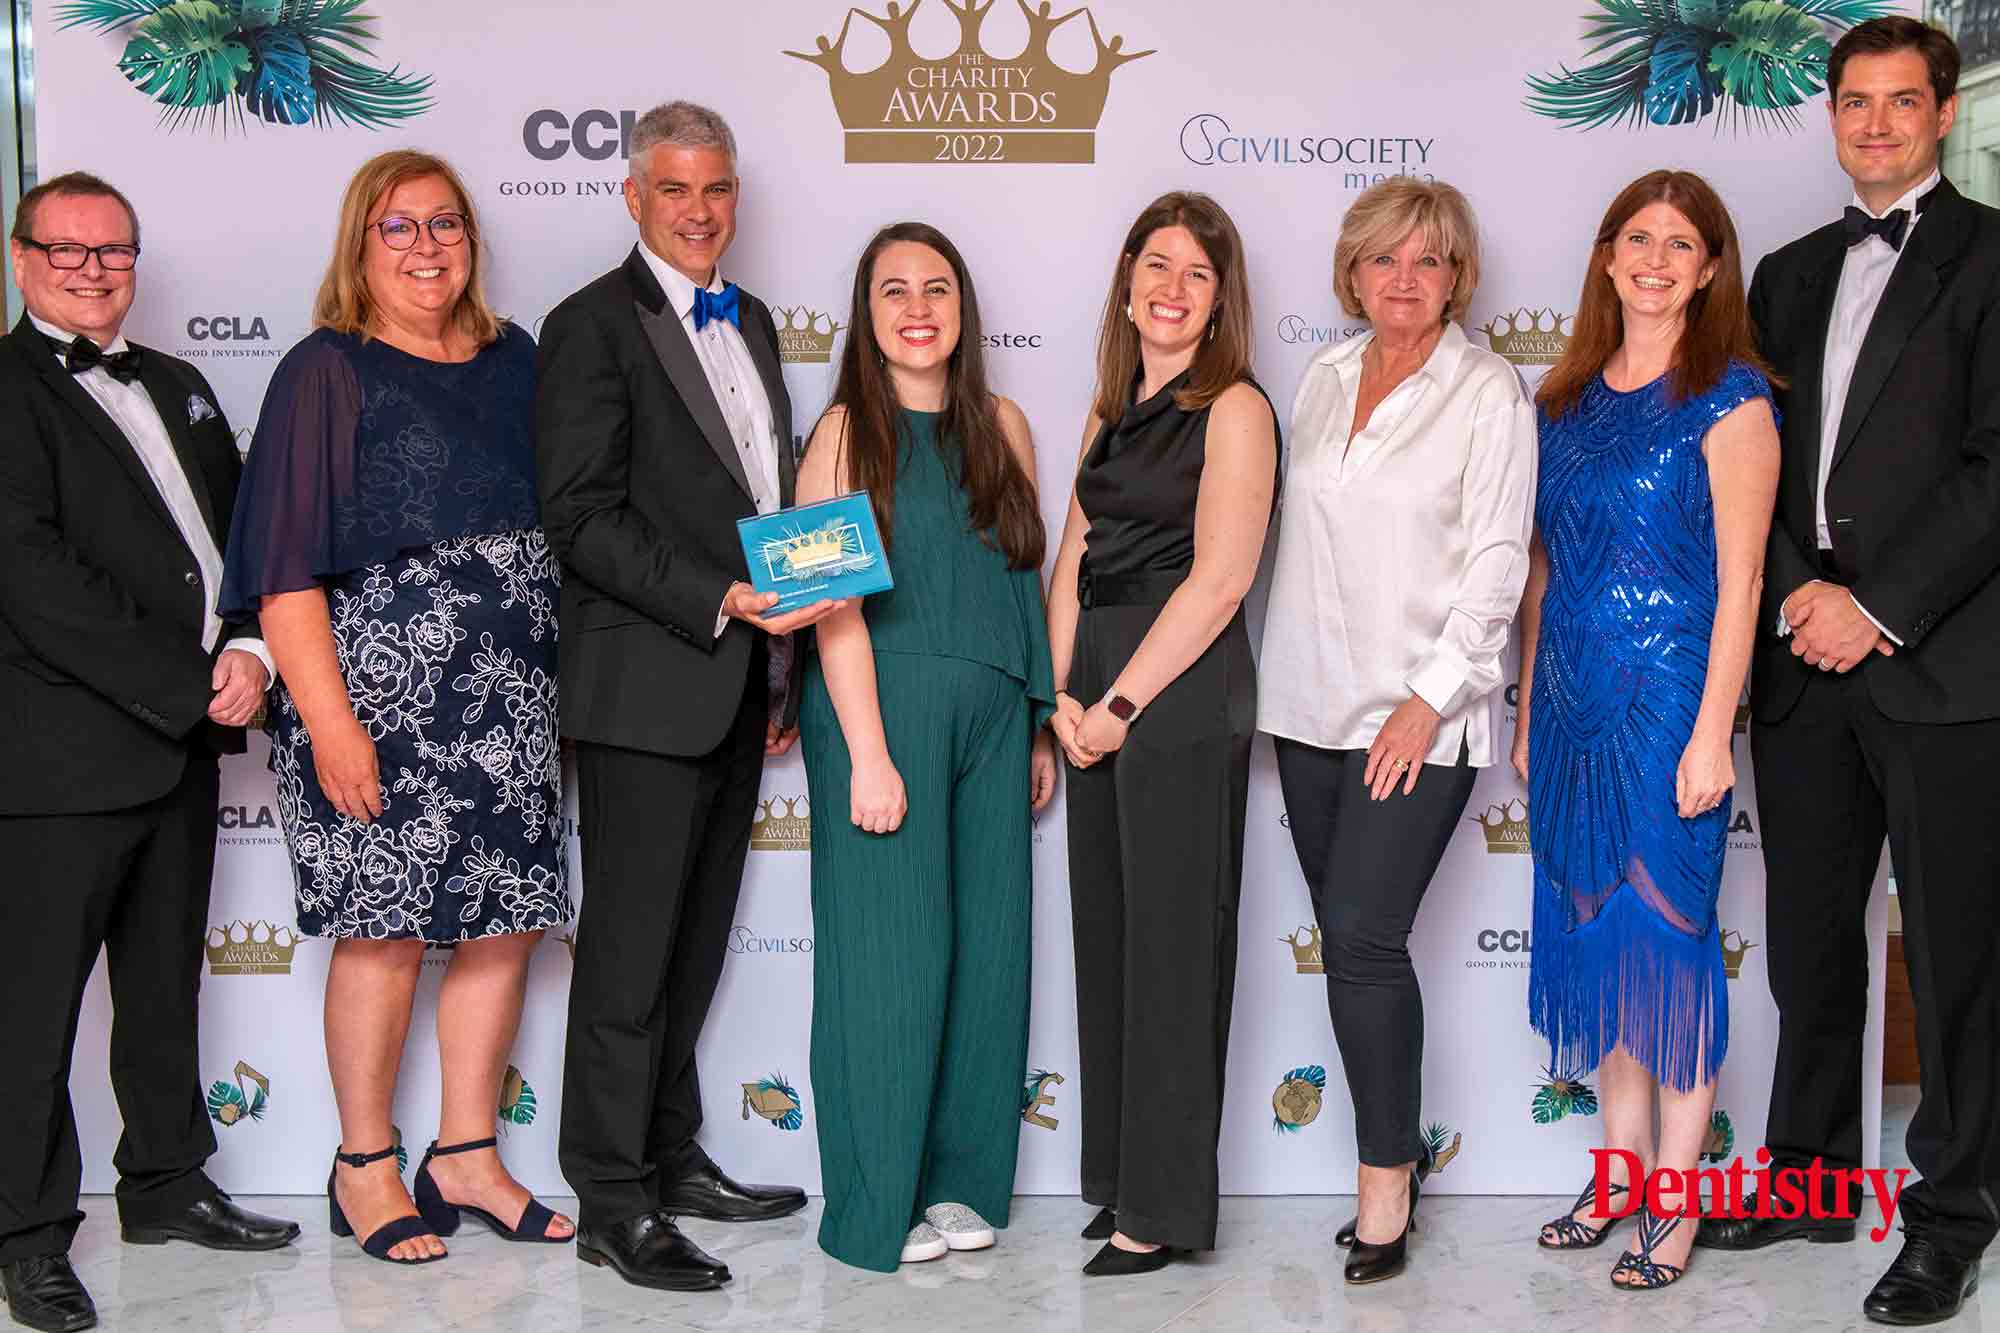 Dentaid wins at the Charity Awards 2022